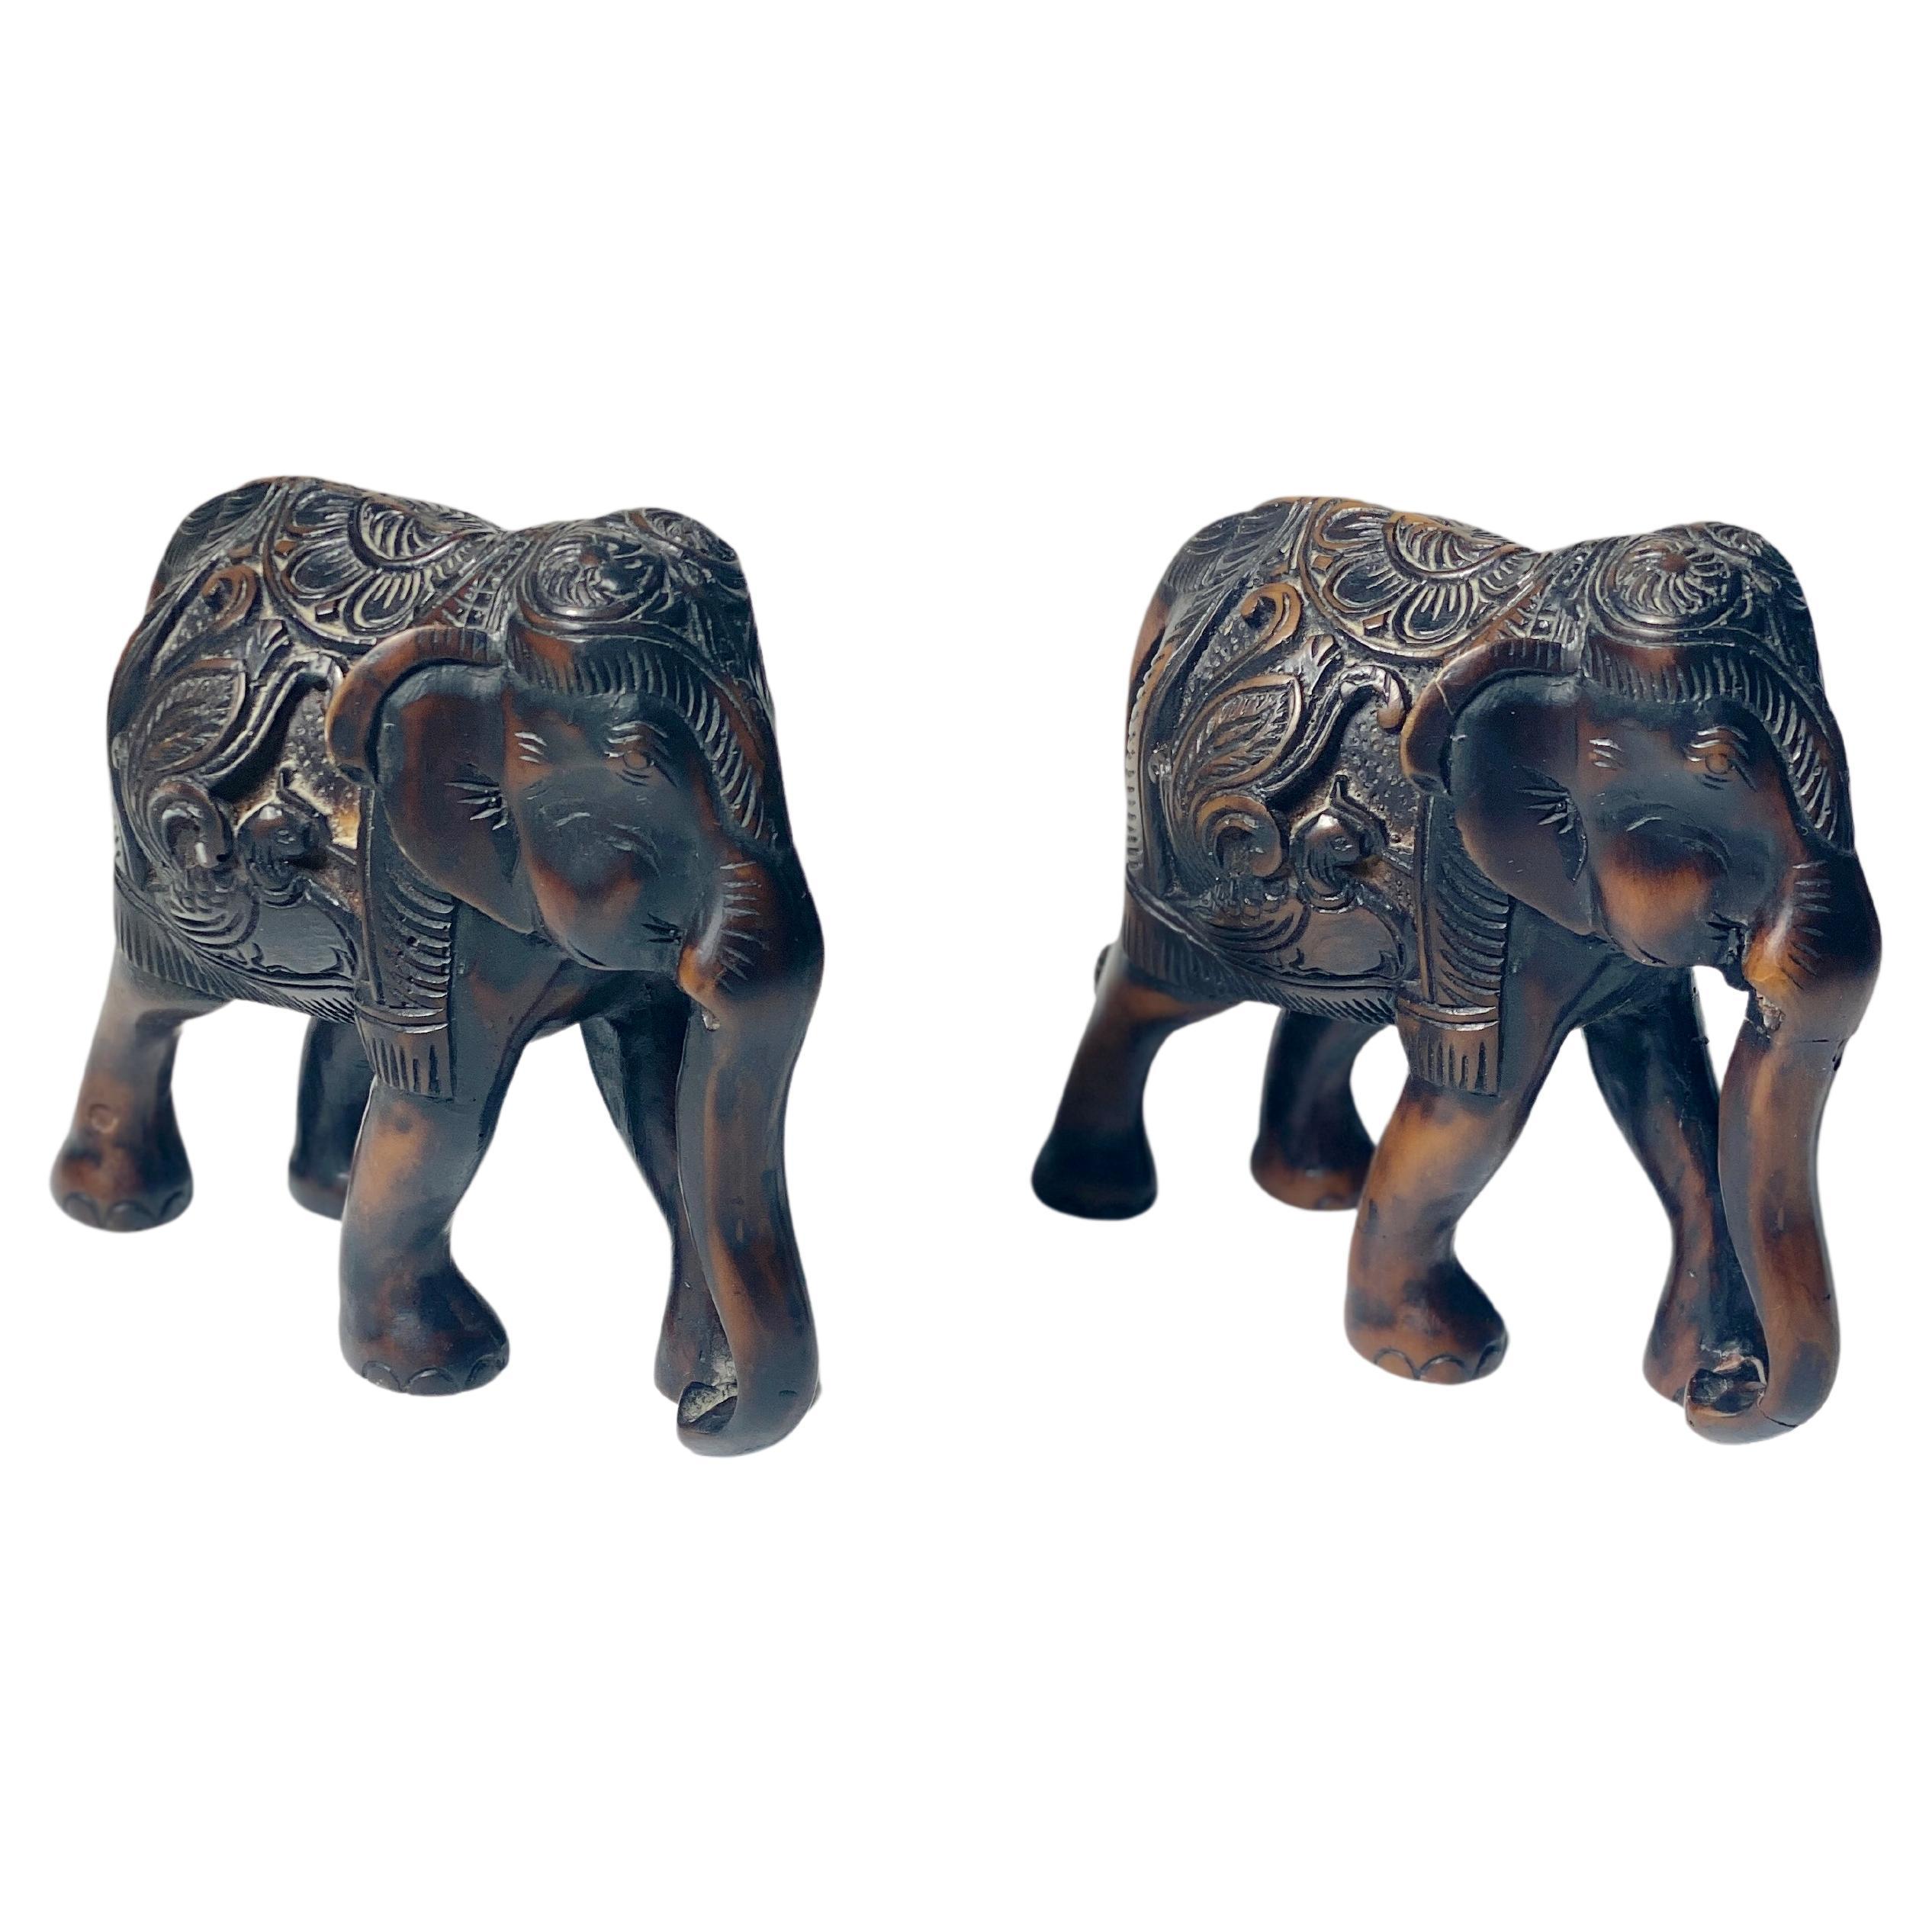 Pair of Elephants Sculptures, in Ceramic, Brown Color, Made in France circa 1970 For Sale